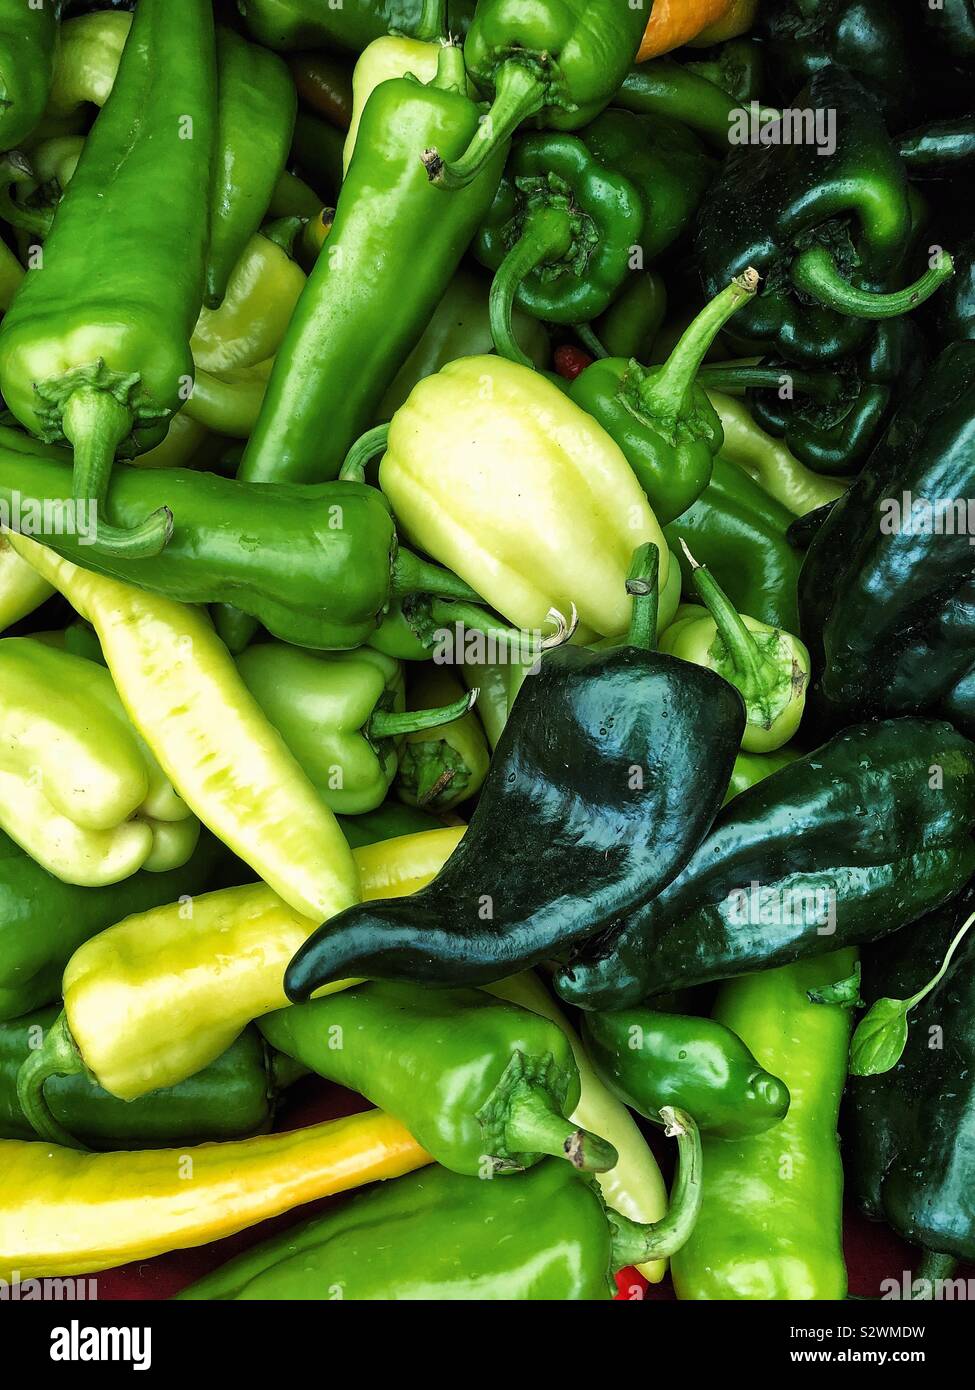 Green peppers at farmers market Stock Photo